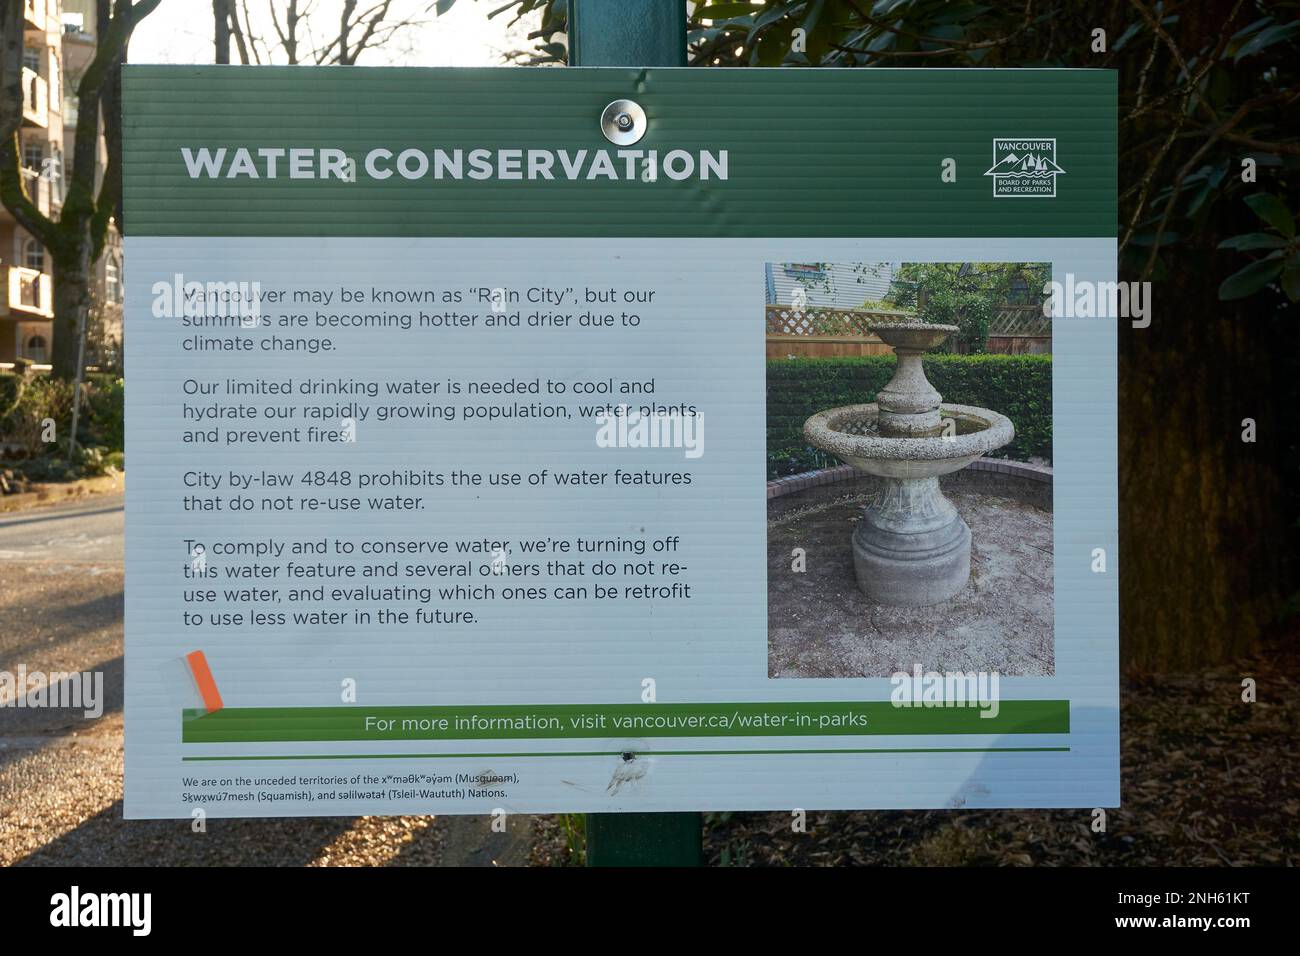 A sign promoting water conservation in Vancouver, British Columbia, Canada Stock Photo